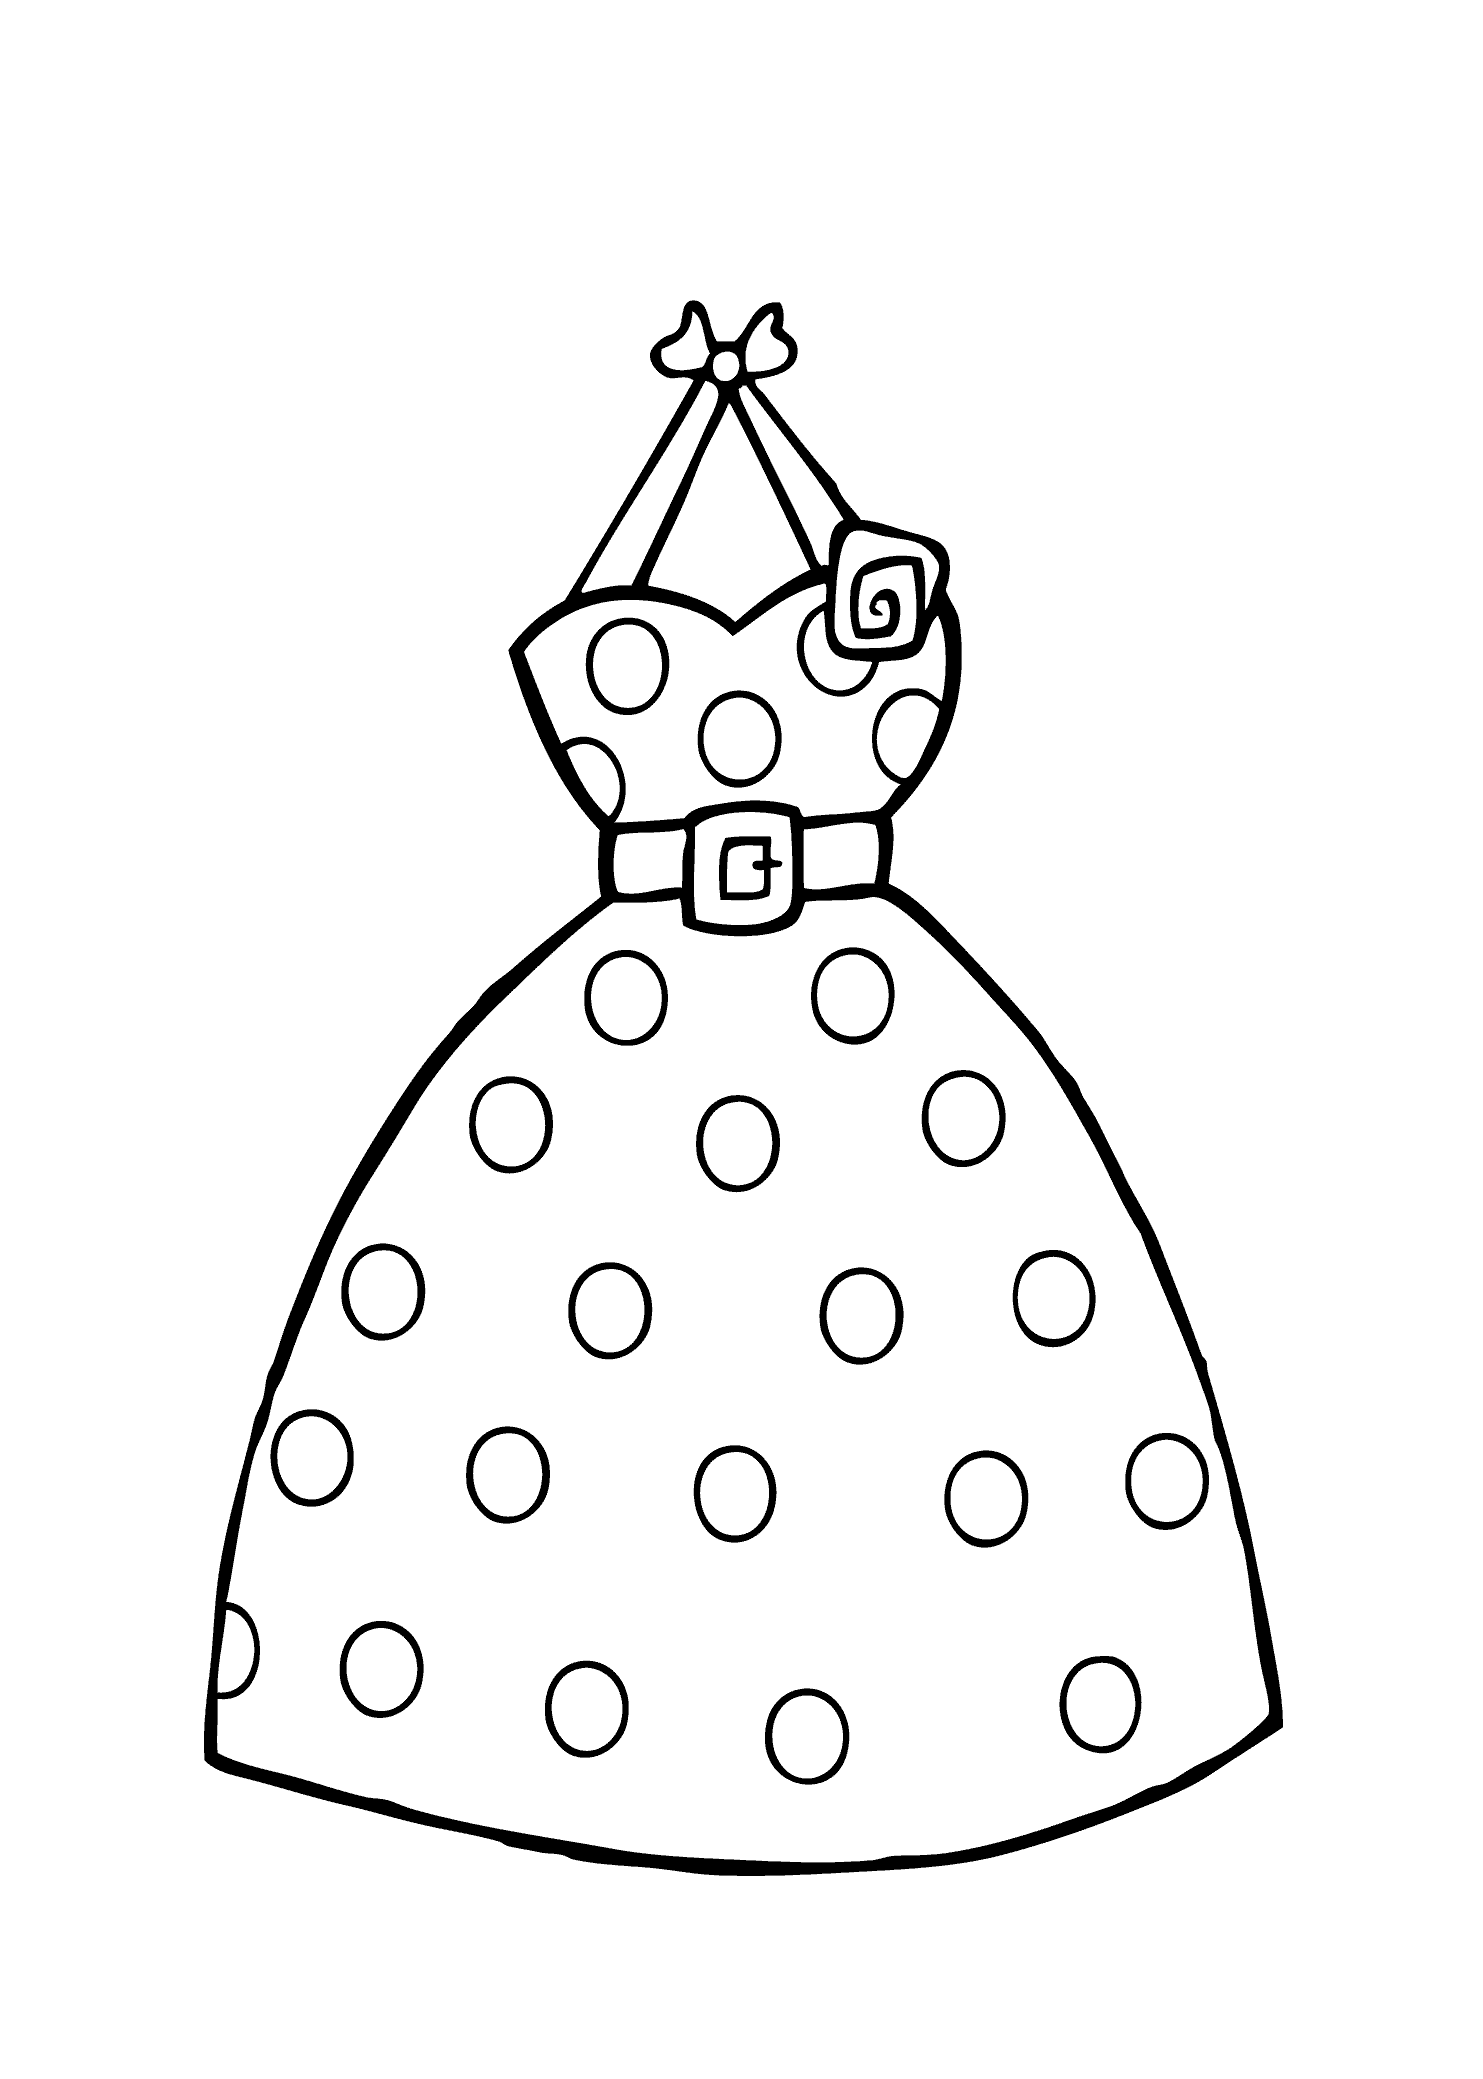 colouring pages dresses dress coloring pages to download and print for free dresses pages colouring 